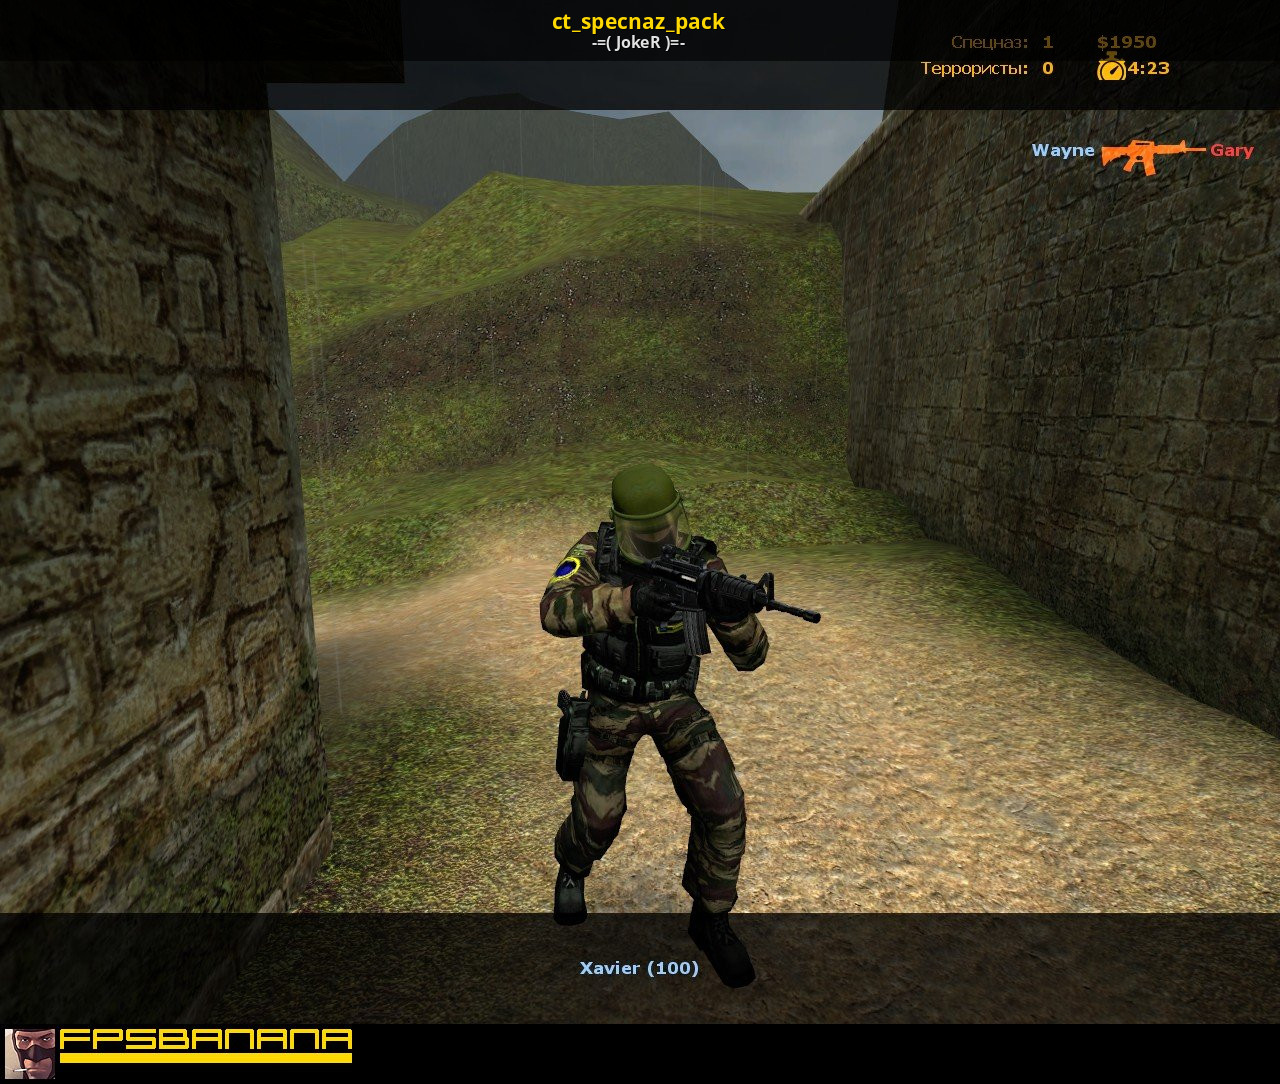 Counter strike source русский. Counter Strike v34 русский спецназ. CS соурс русский спецназ. Counter Strike source спецназ. CS source русский спецназ 2006.